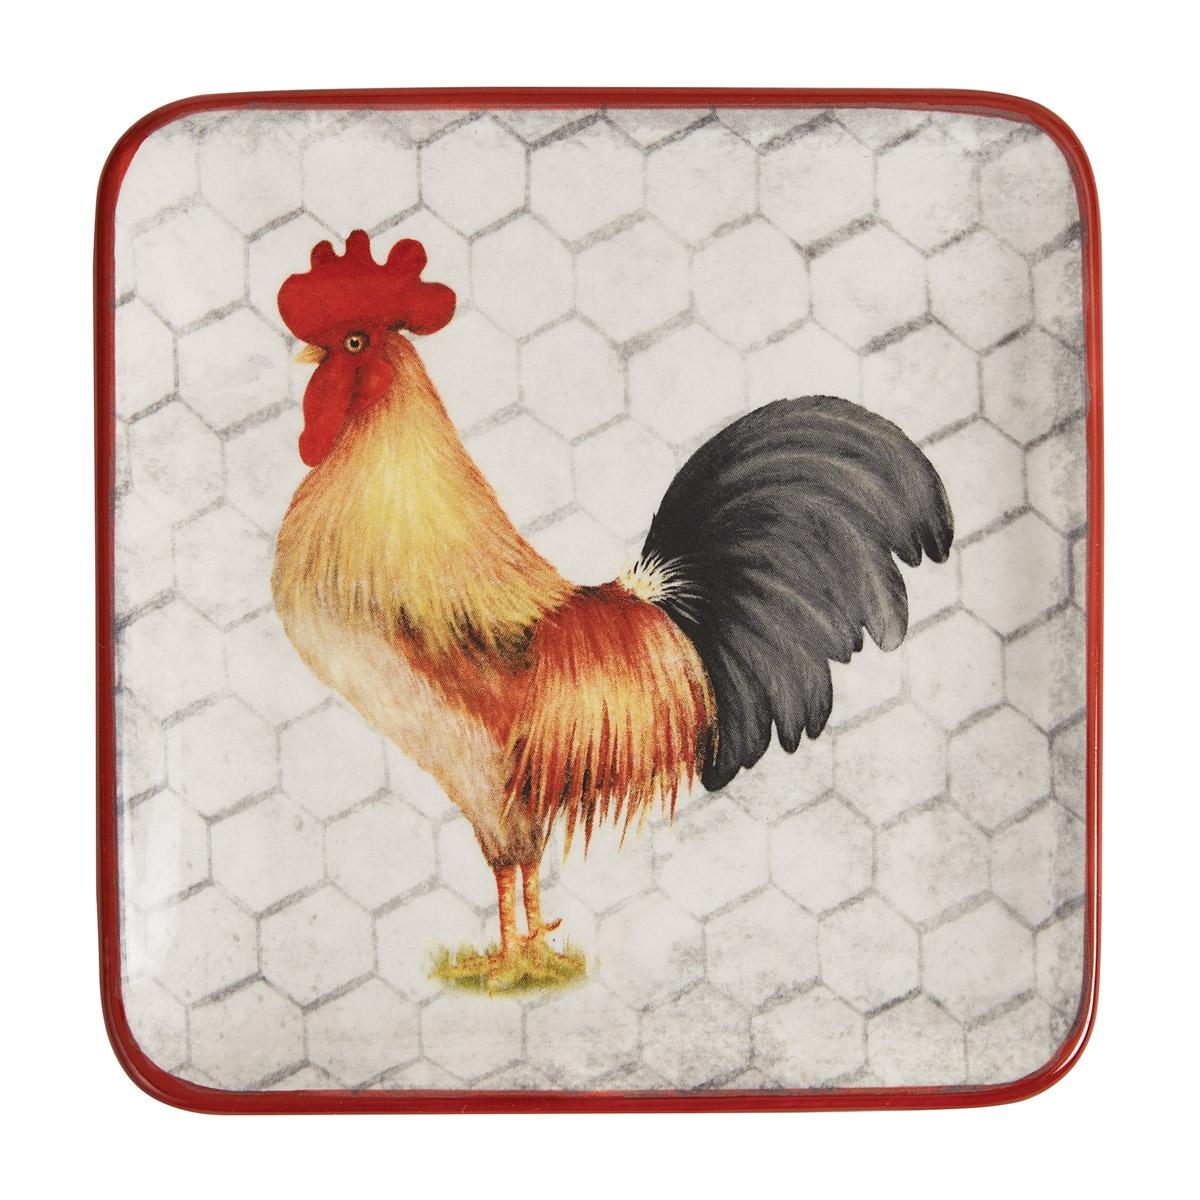 at Home Red Ceramic Rooster Spoon Rest